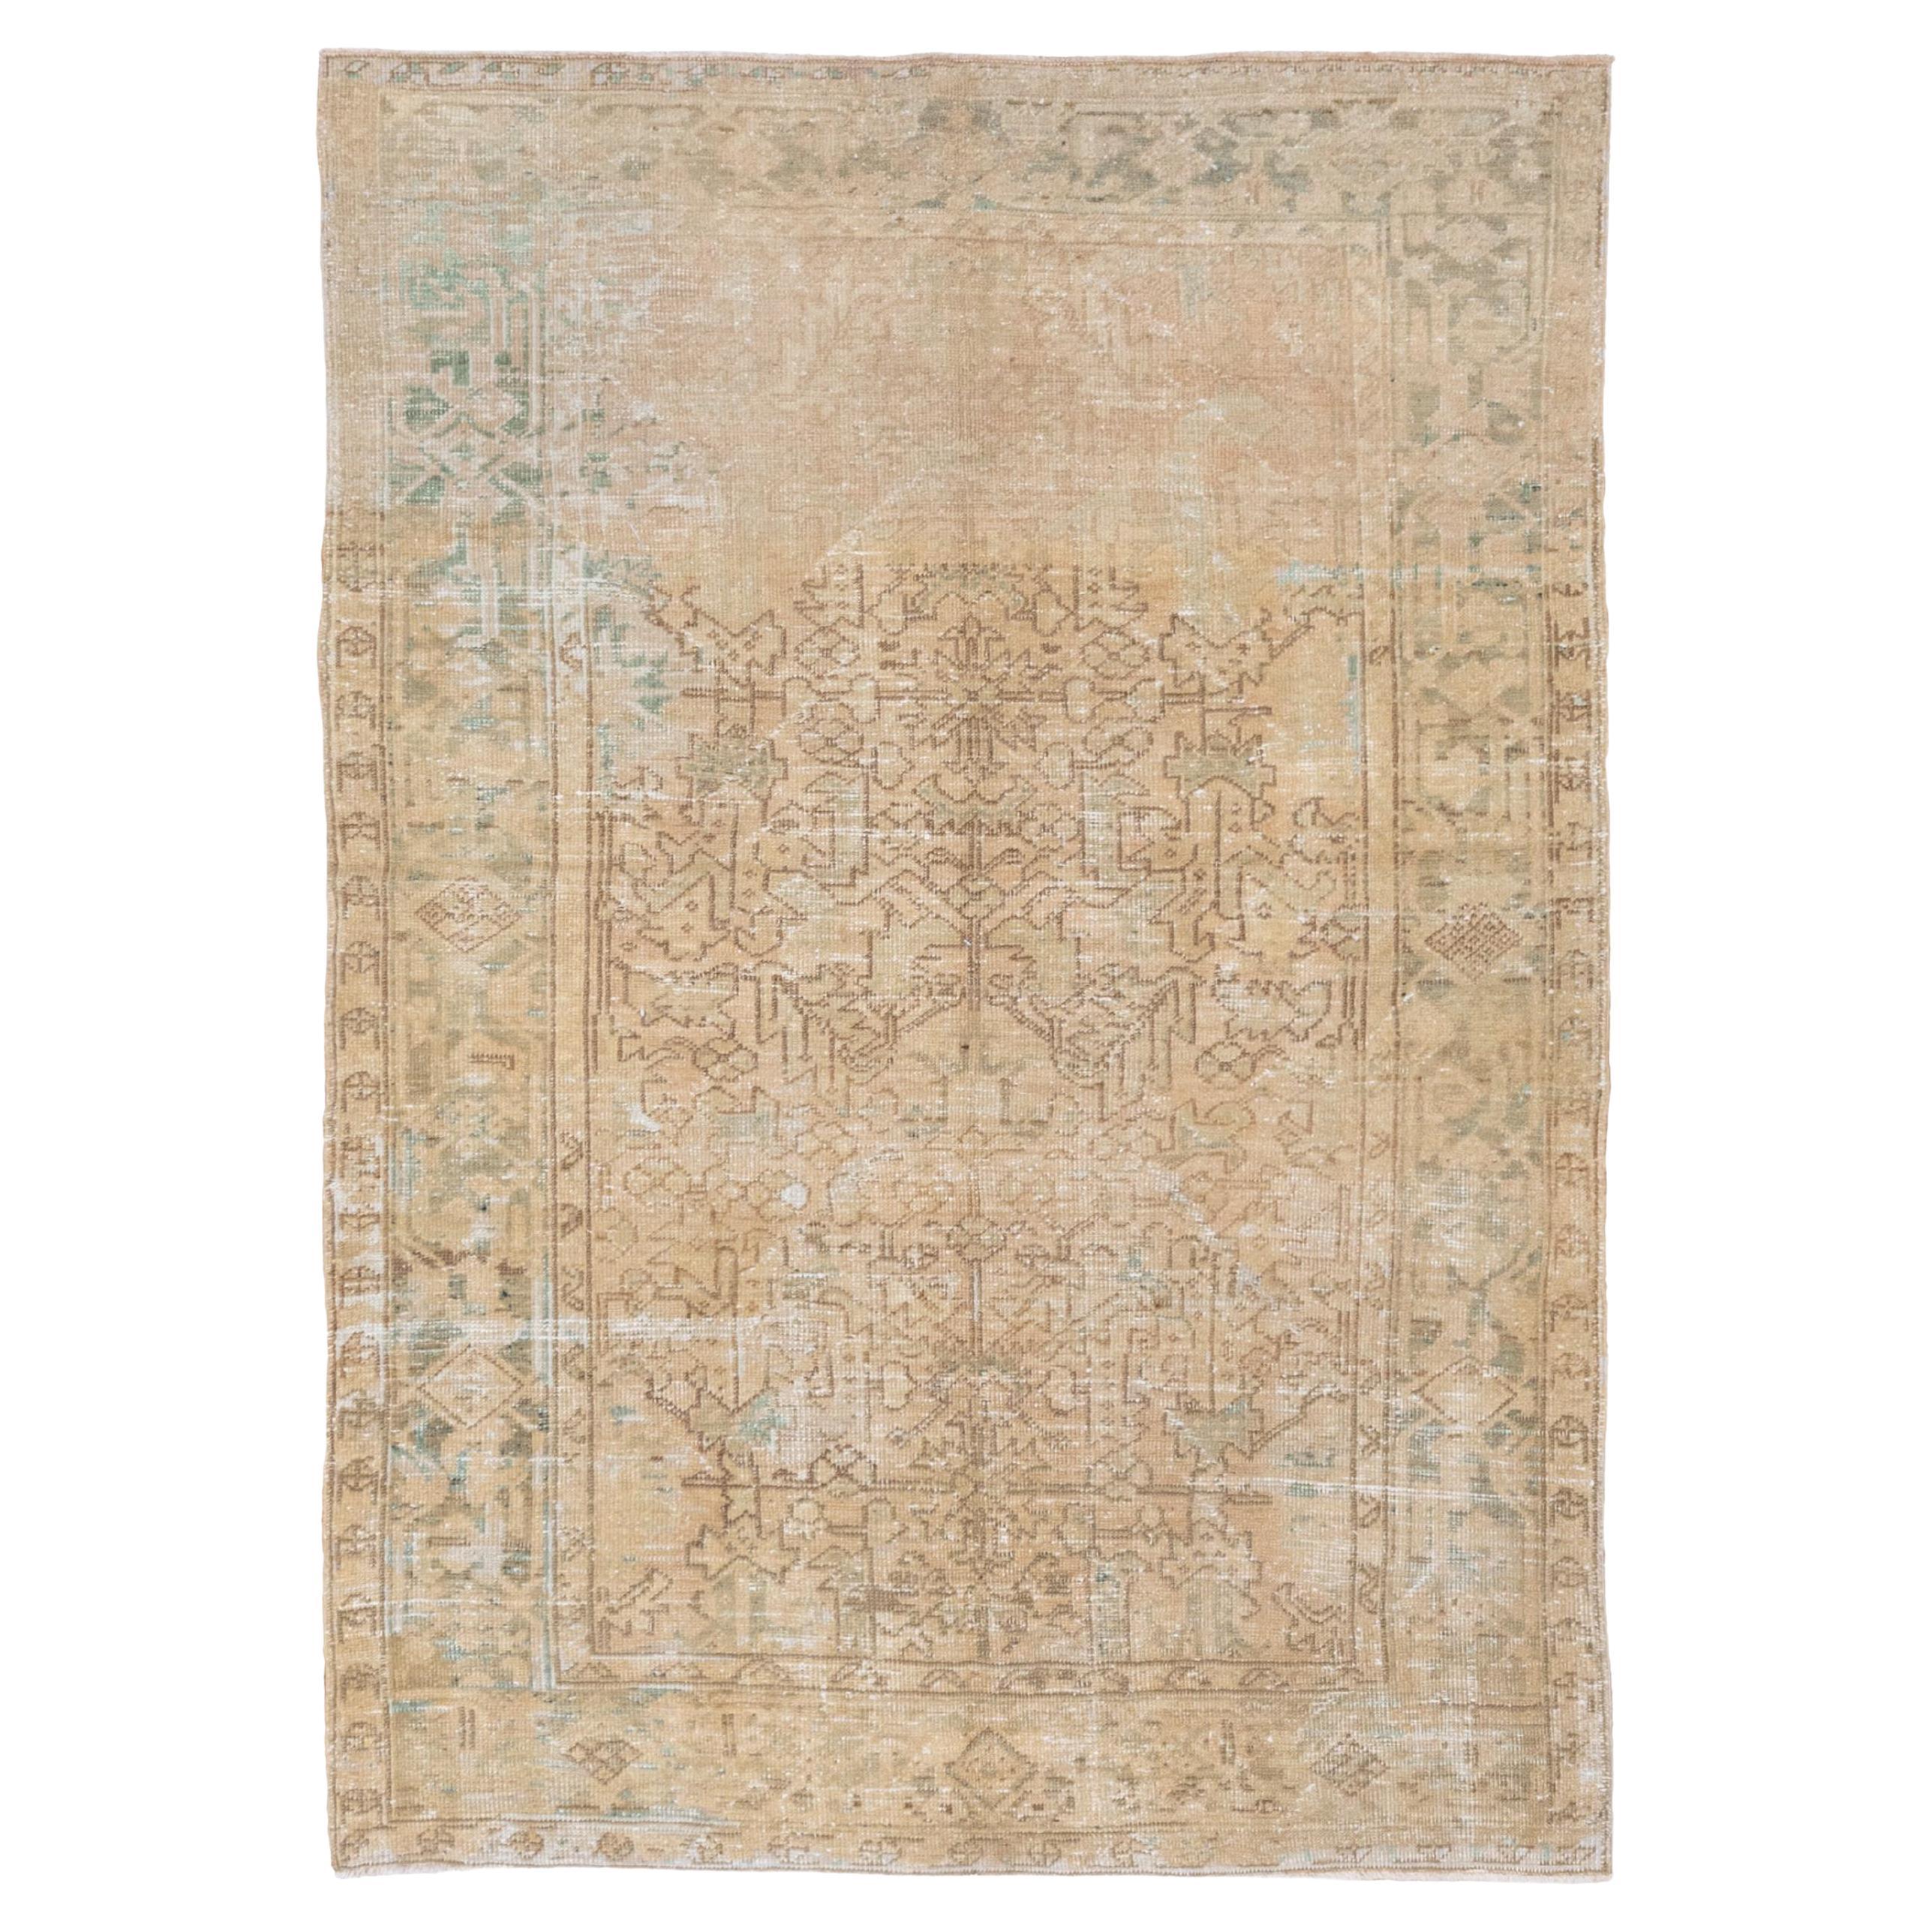 Shabby Chic Antique Persian Heriz Rug, Neutral Palette with Blue & Green Accents